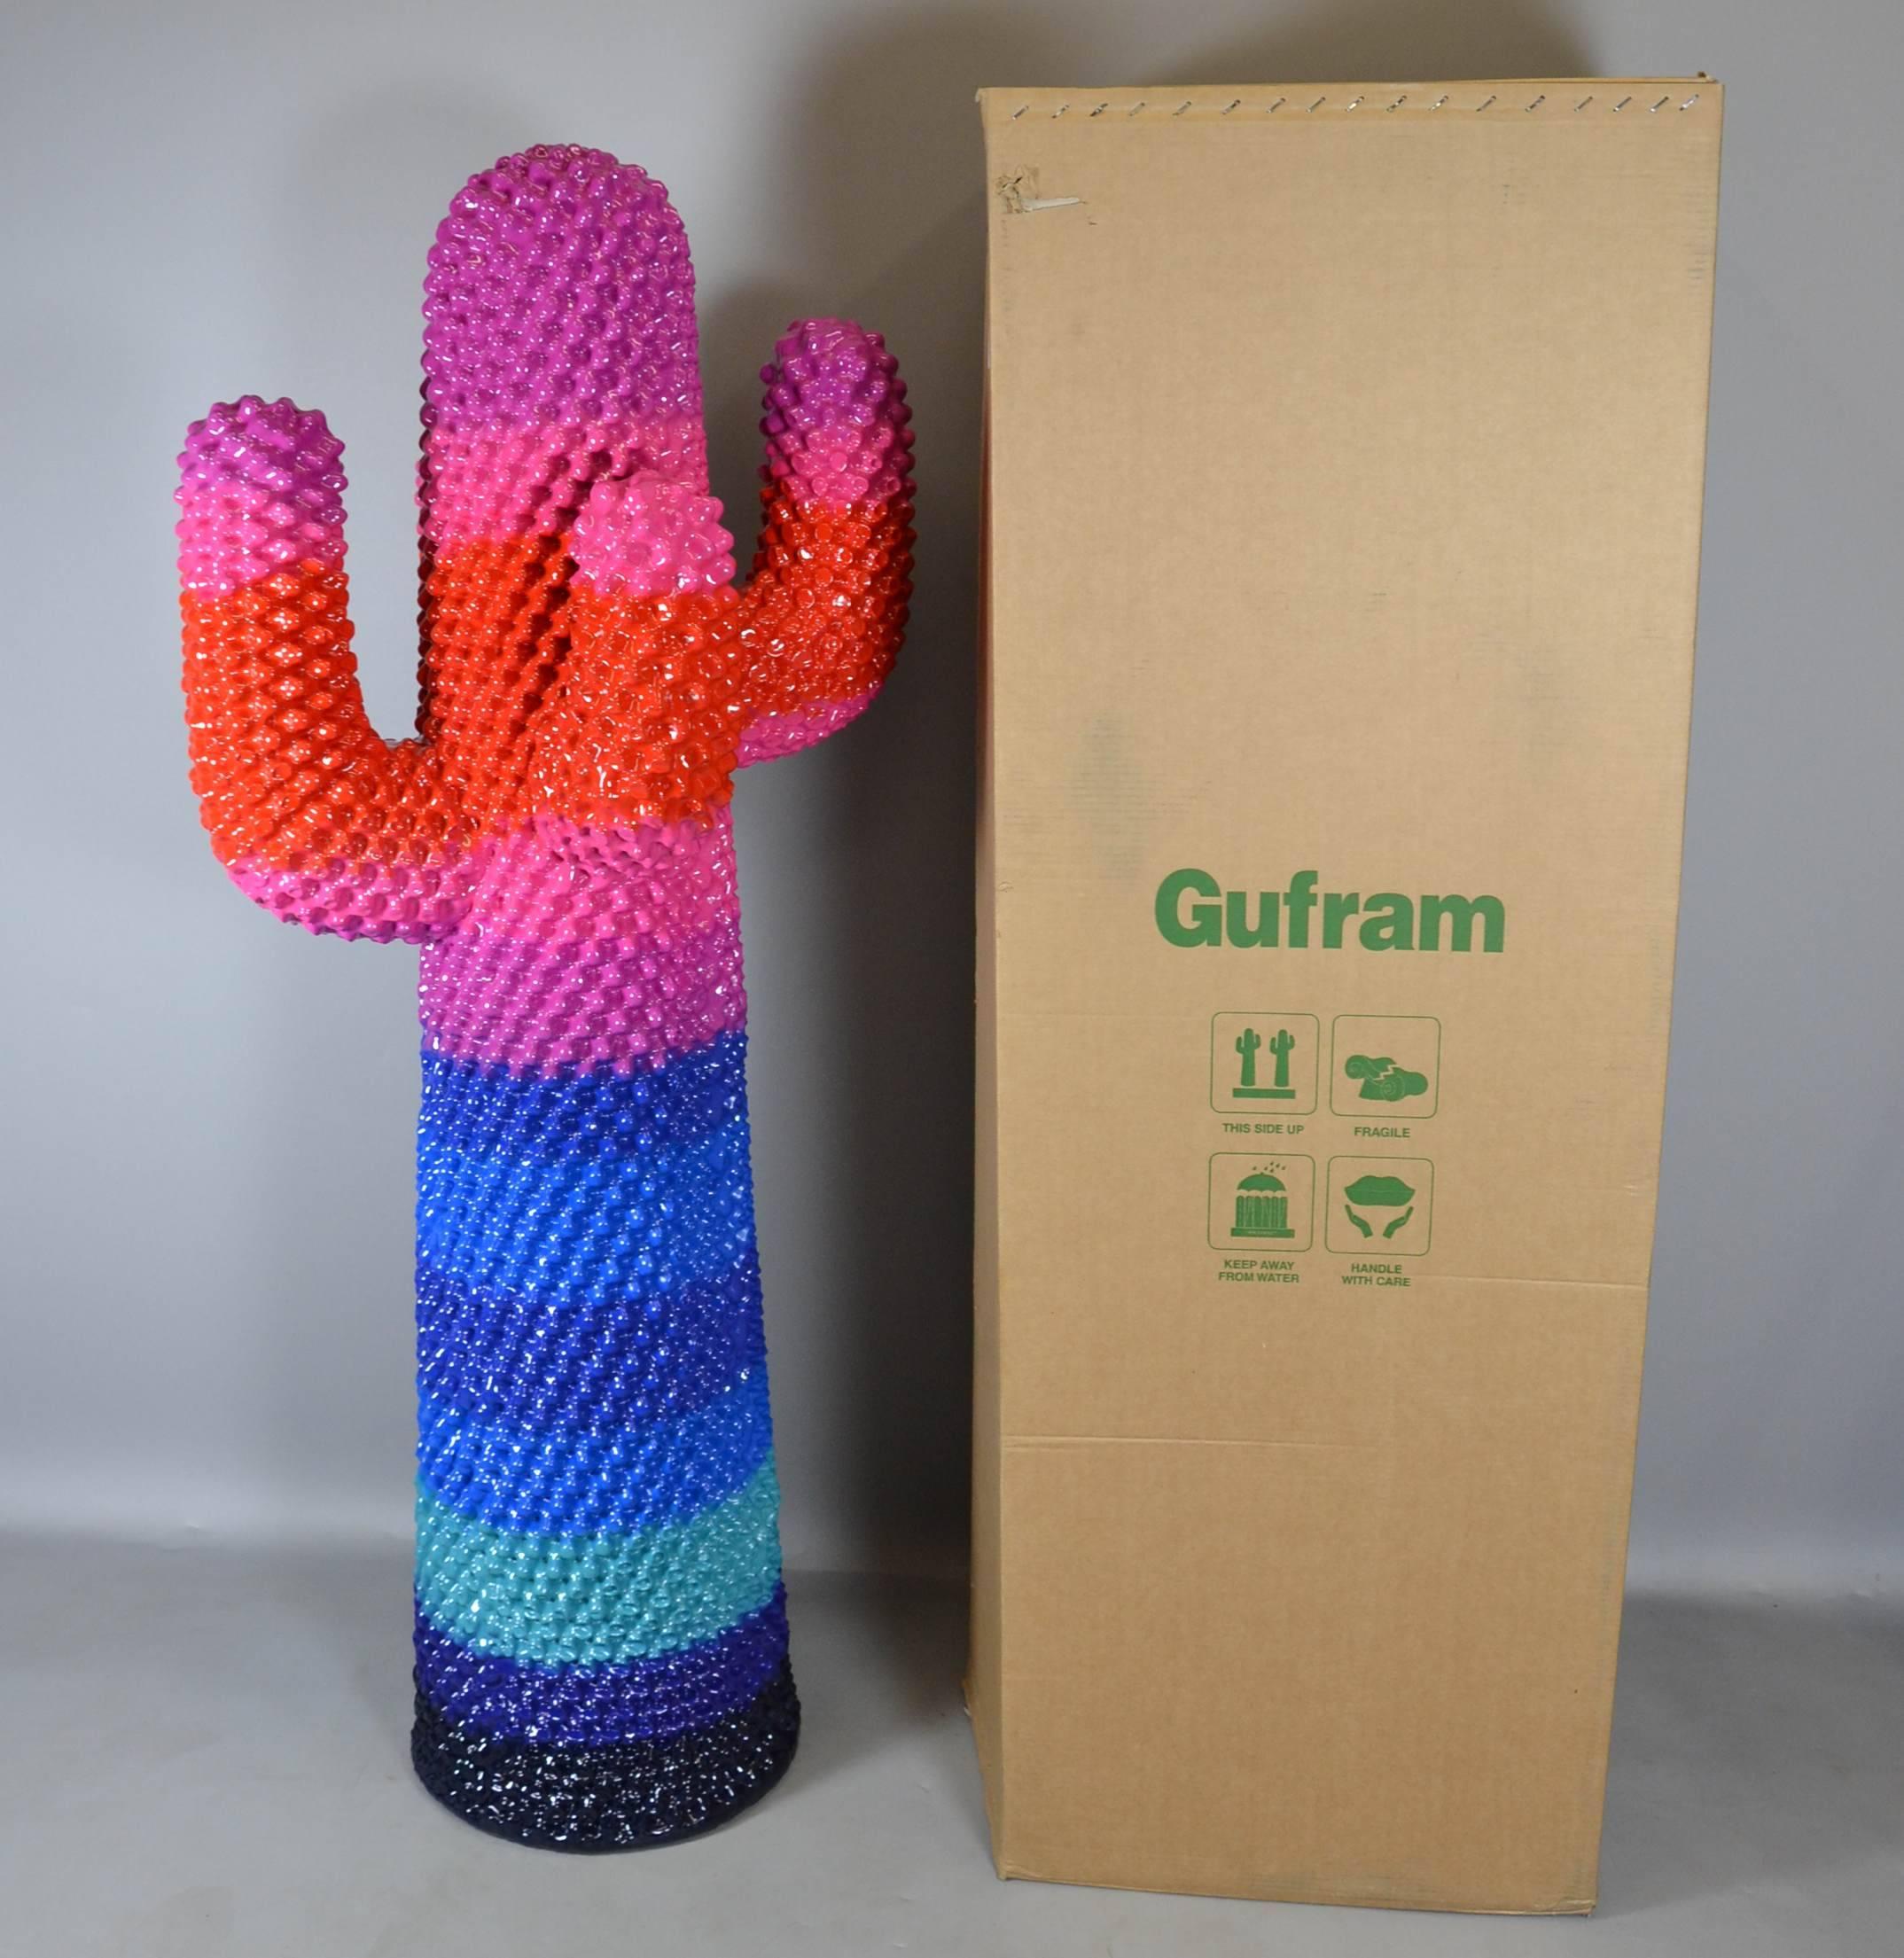 Foam Psychedelic Cactus Gufram Drocco Mello & Paul Smith Limited Edition For Sale